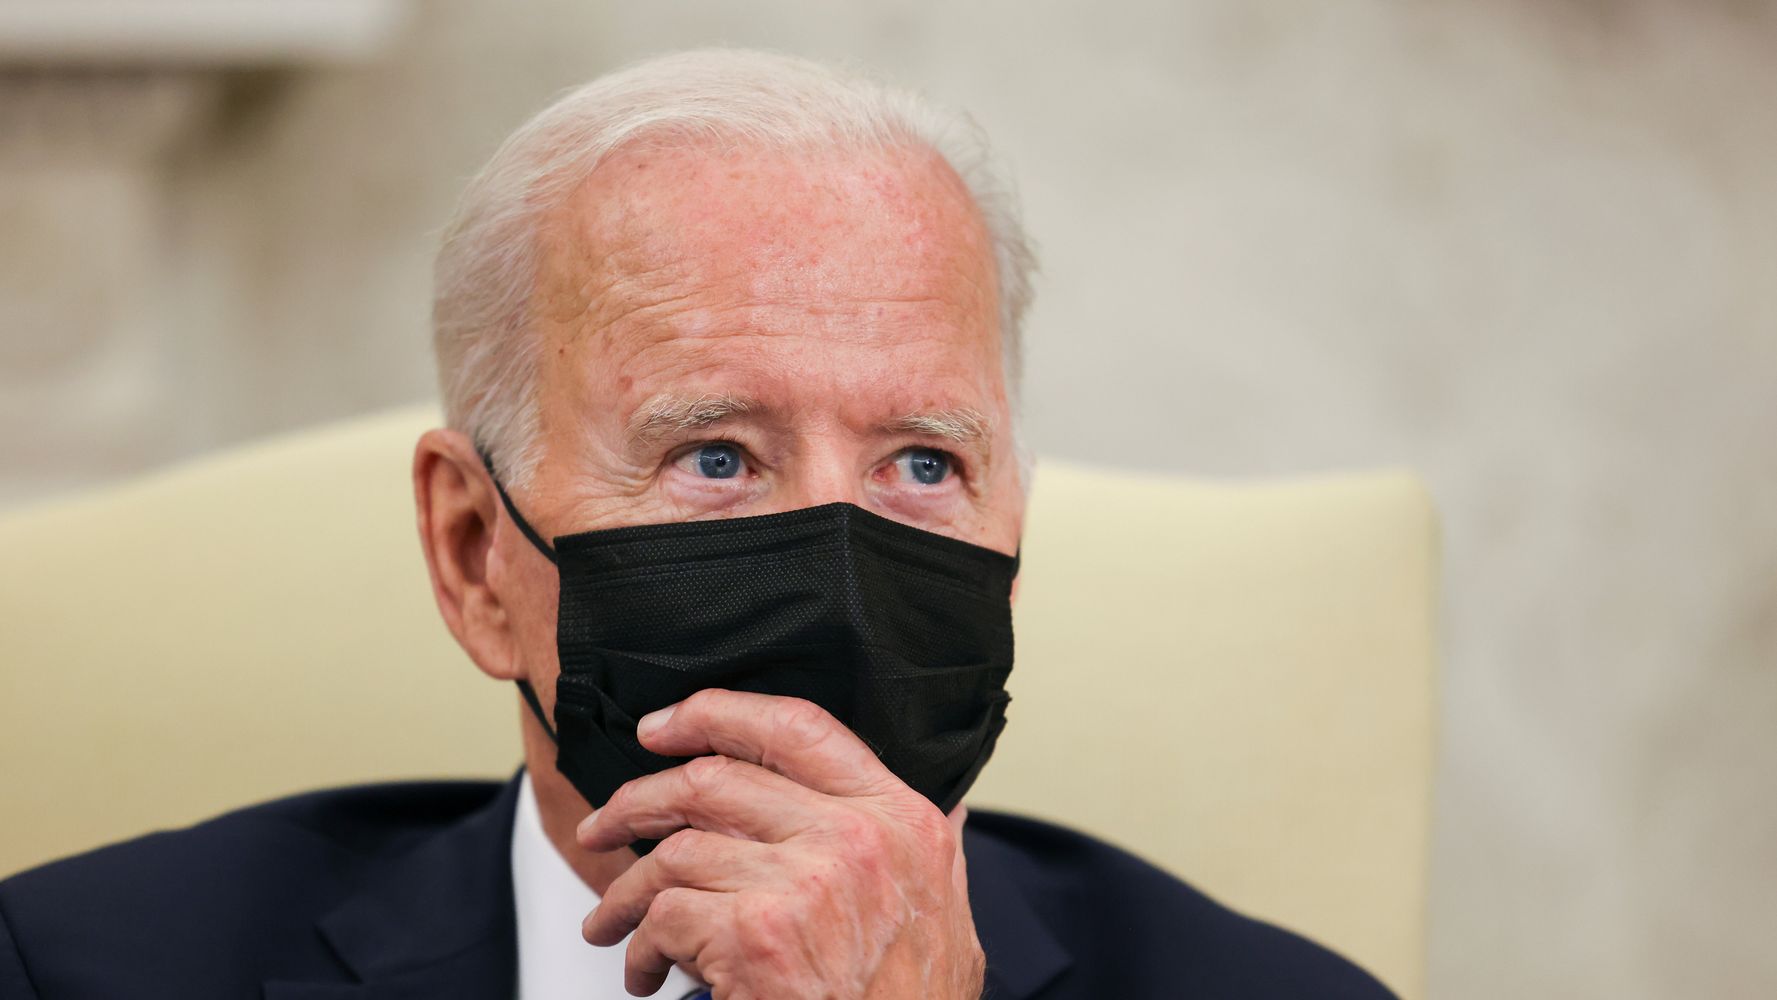 To End Pandemic, Biden Plans To Donate 1 Billion Doses Of COVID-19 Vaccine